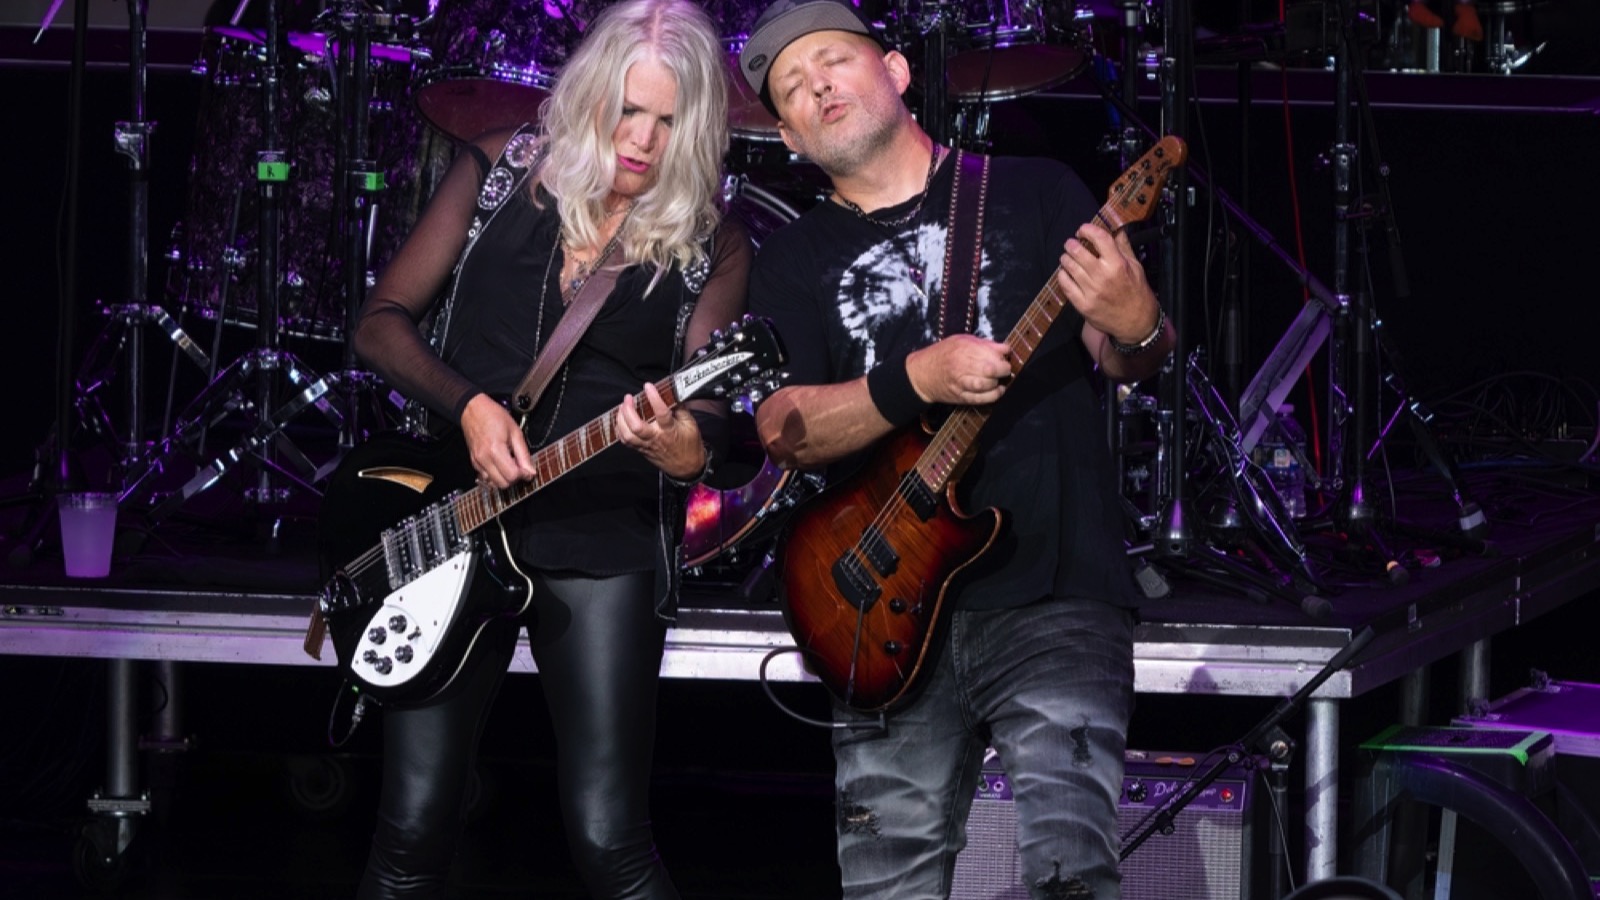 Clarkston, Michigan -USA- Jully 13, 2023: The band Jefferson Starship performs live at Pine Knob Music Theater as guest for Bret Michaels